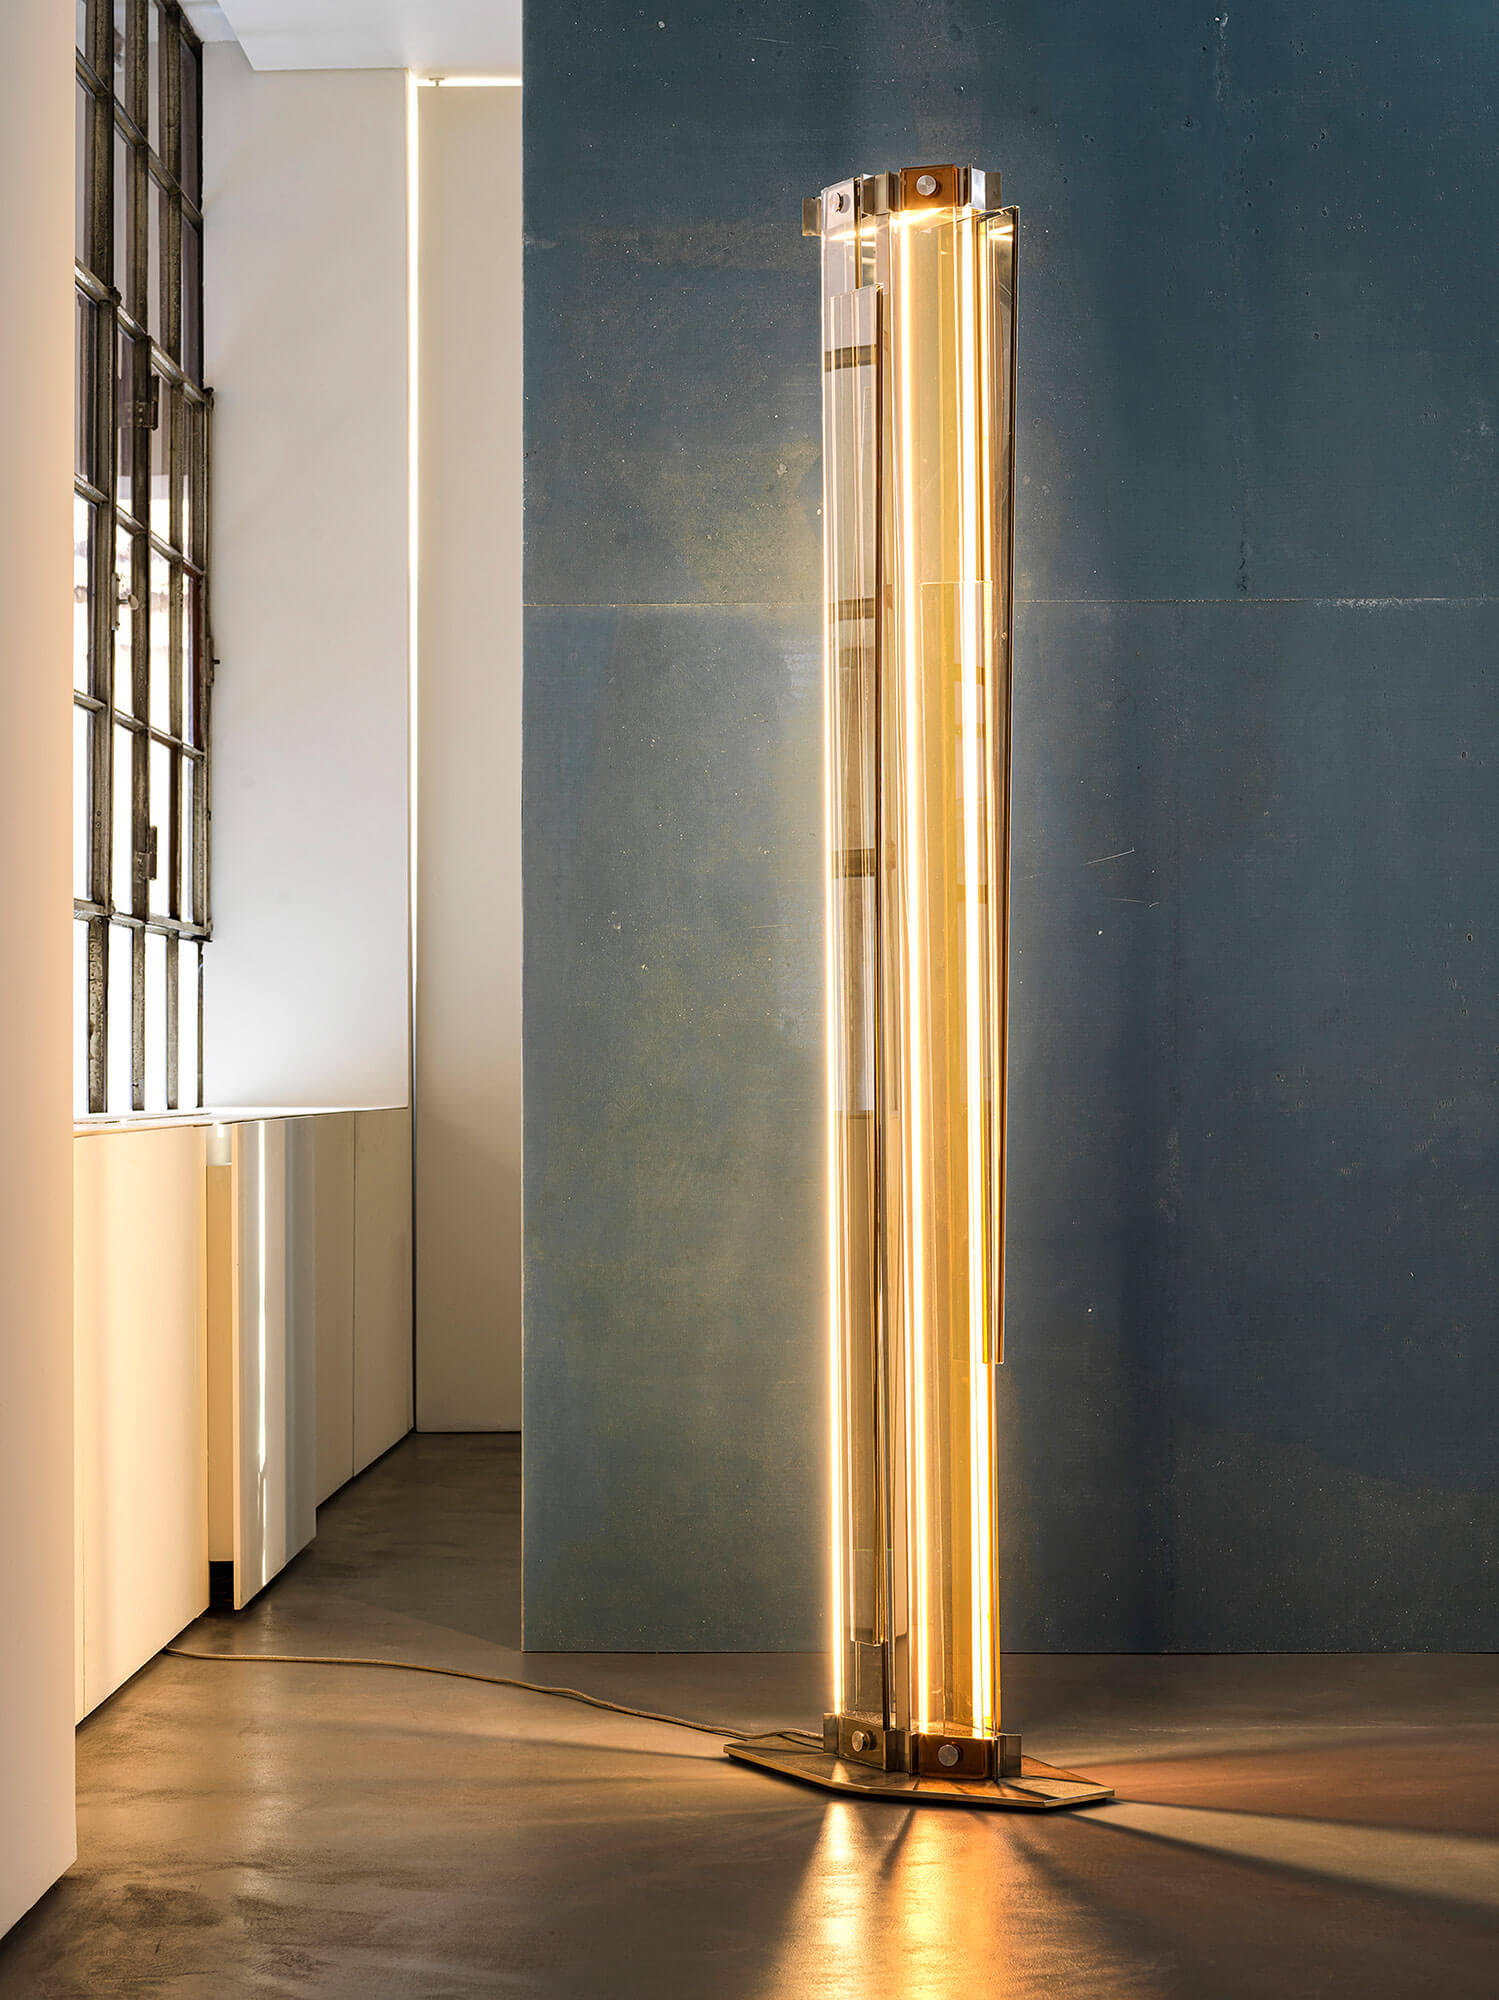 Salone del Mobile and Milan Design Week: Our Review.